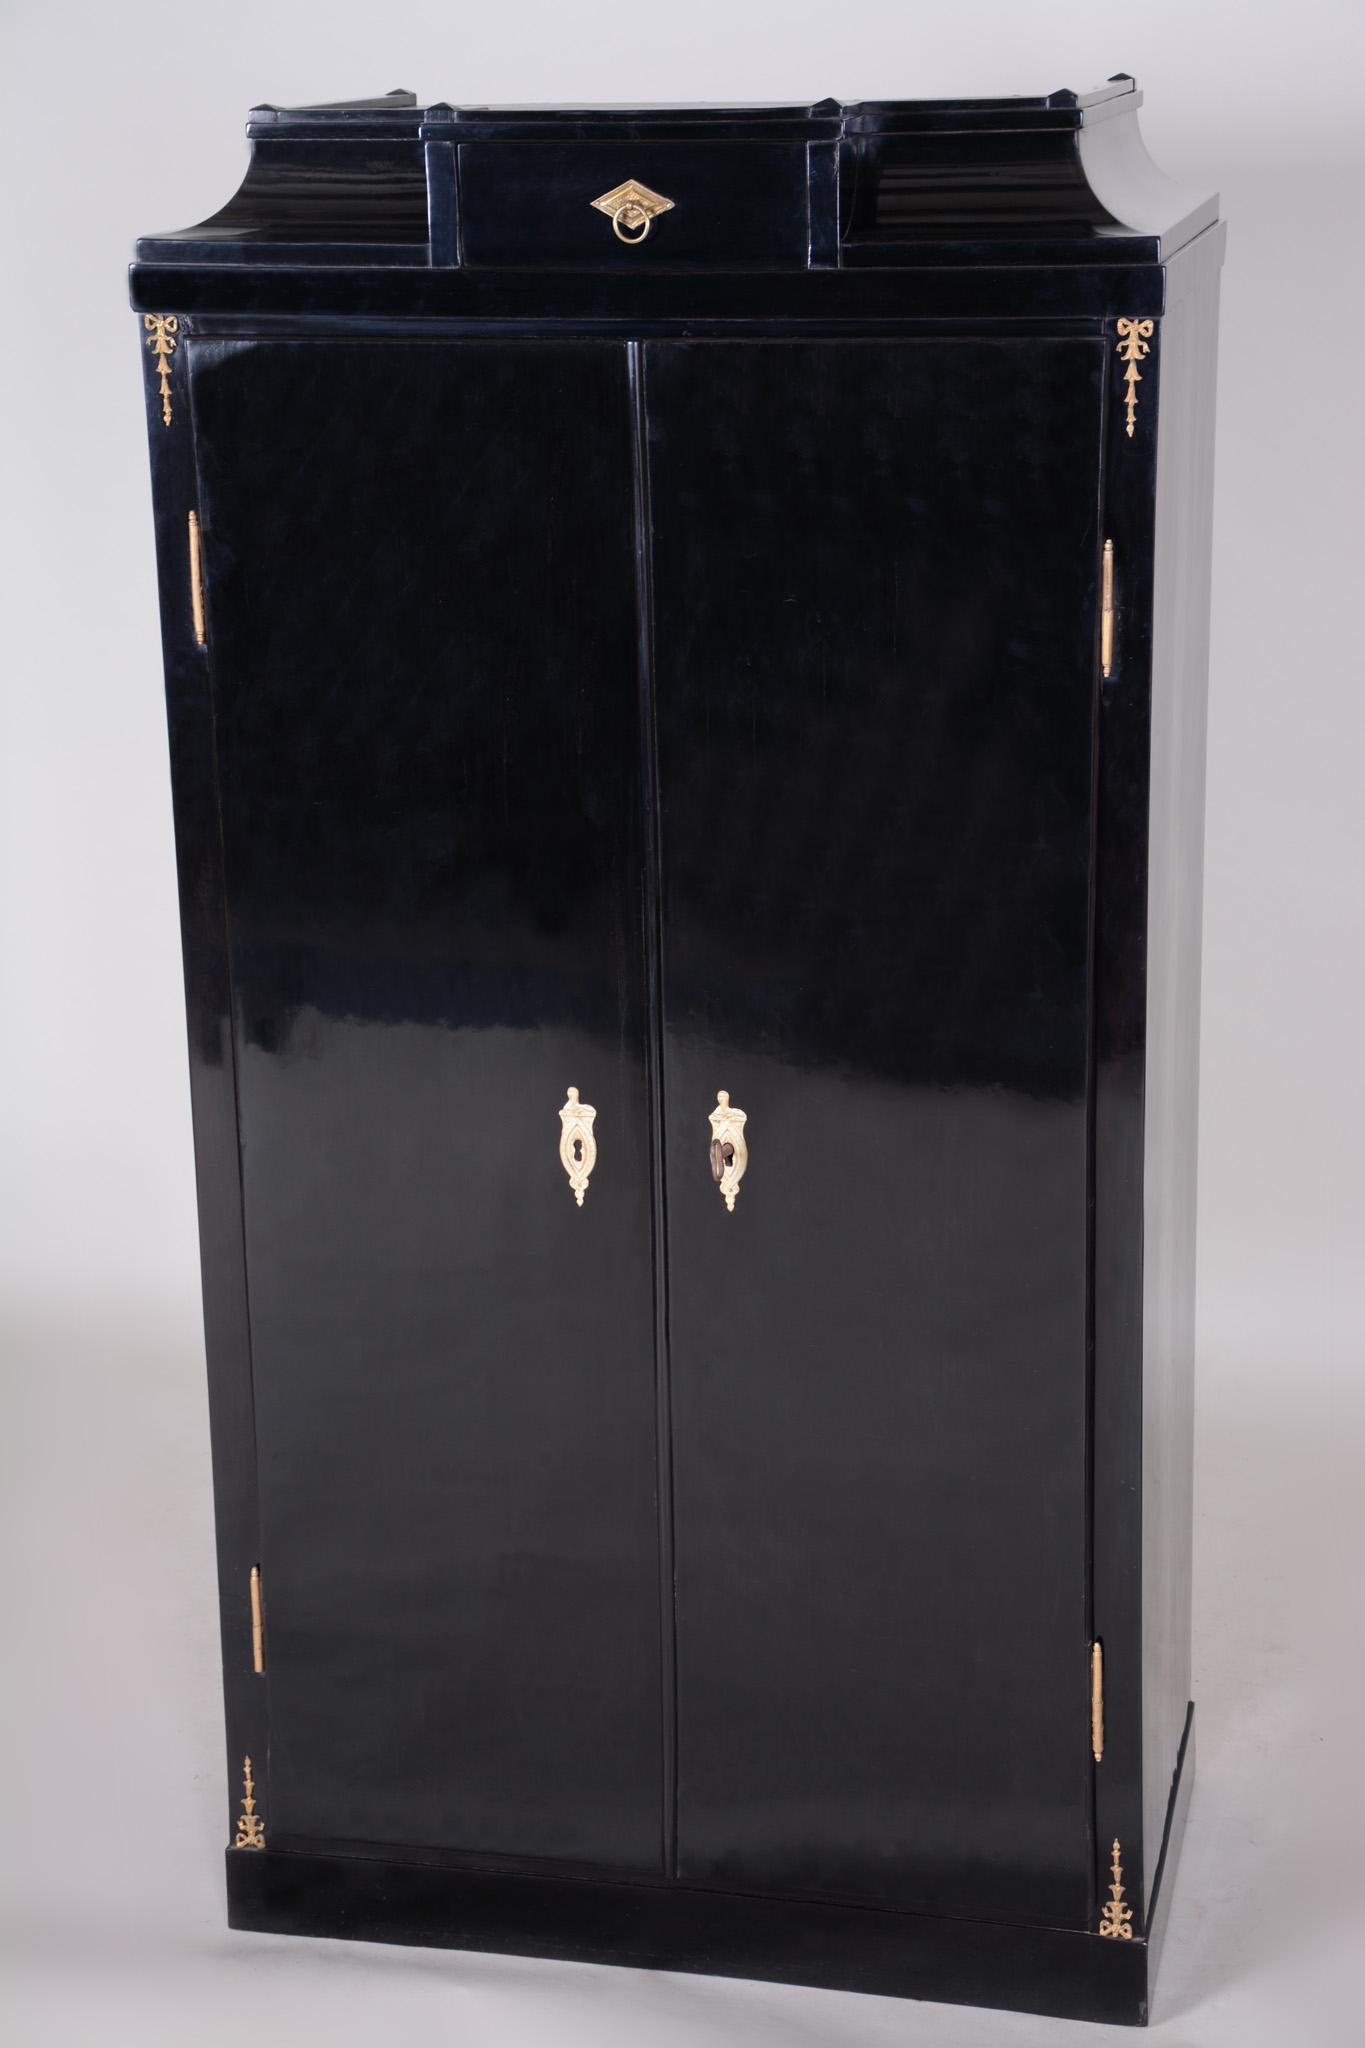 Shipping to any US port only for $290 USD

19th century Empire double-door bookcase.
Completely restored, surface made by black lacquer
Material: Pear wood
Period: 1810-1819
Source: Vien, Austria.

We guarantee safe a the cheapest air transport from